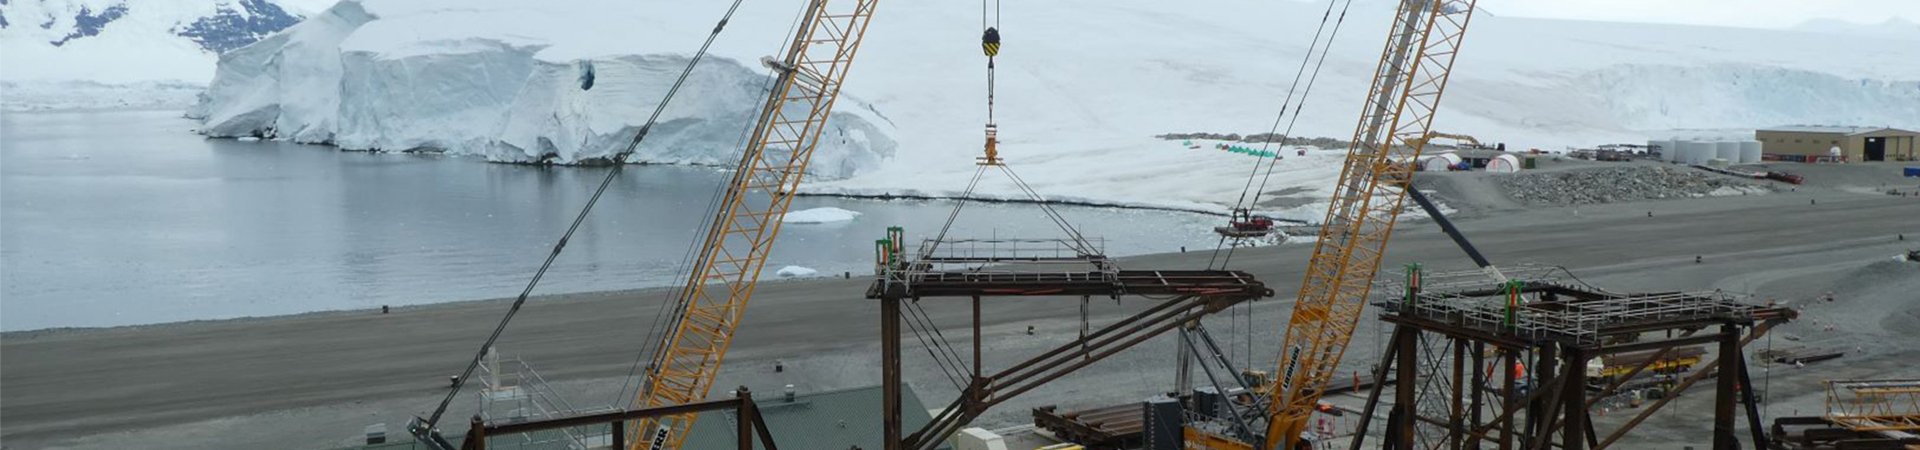 Structural steelwork near icebergs